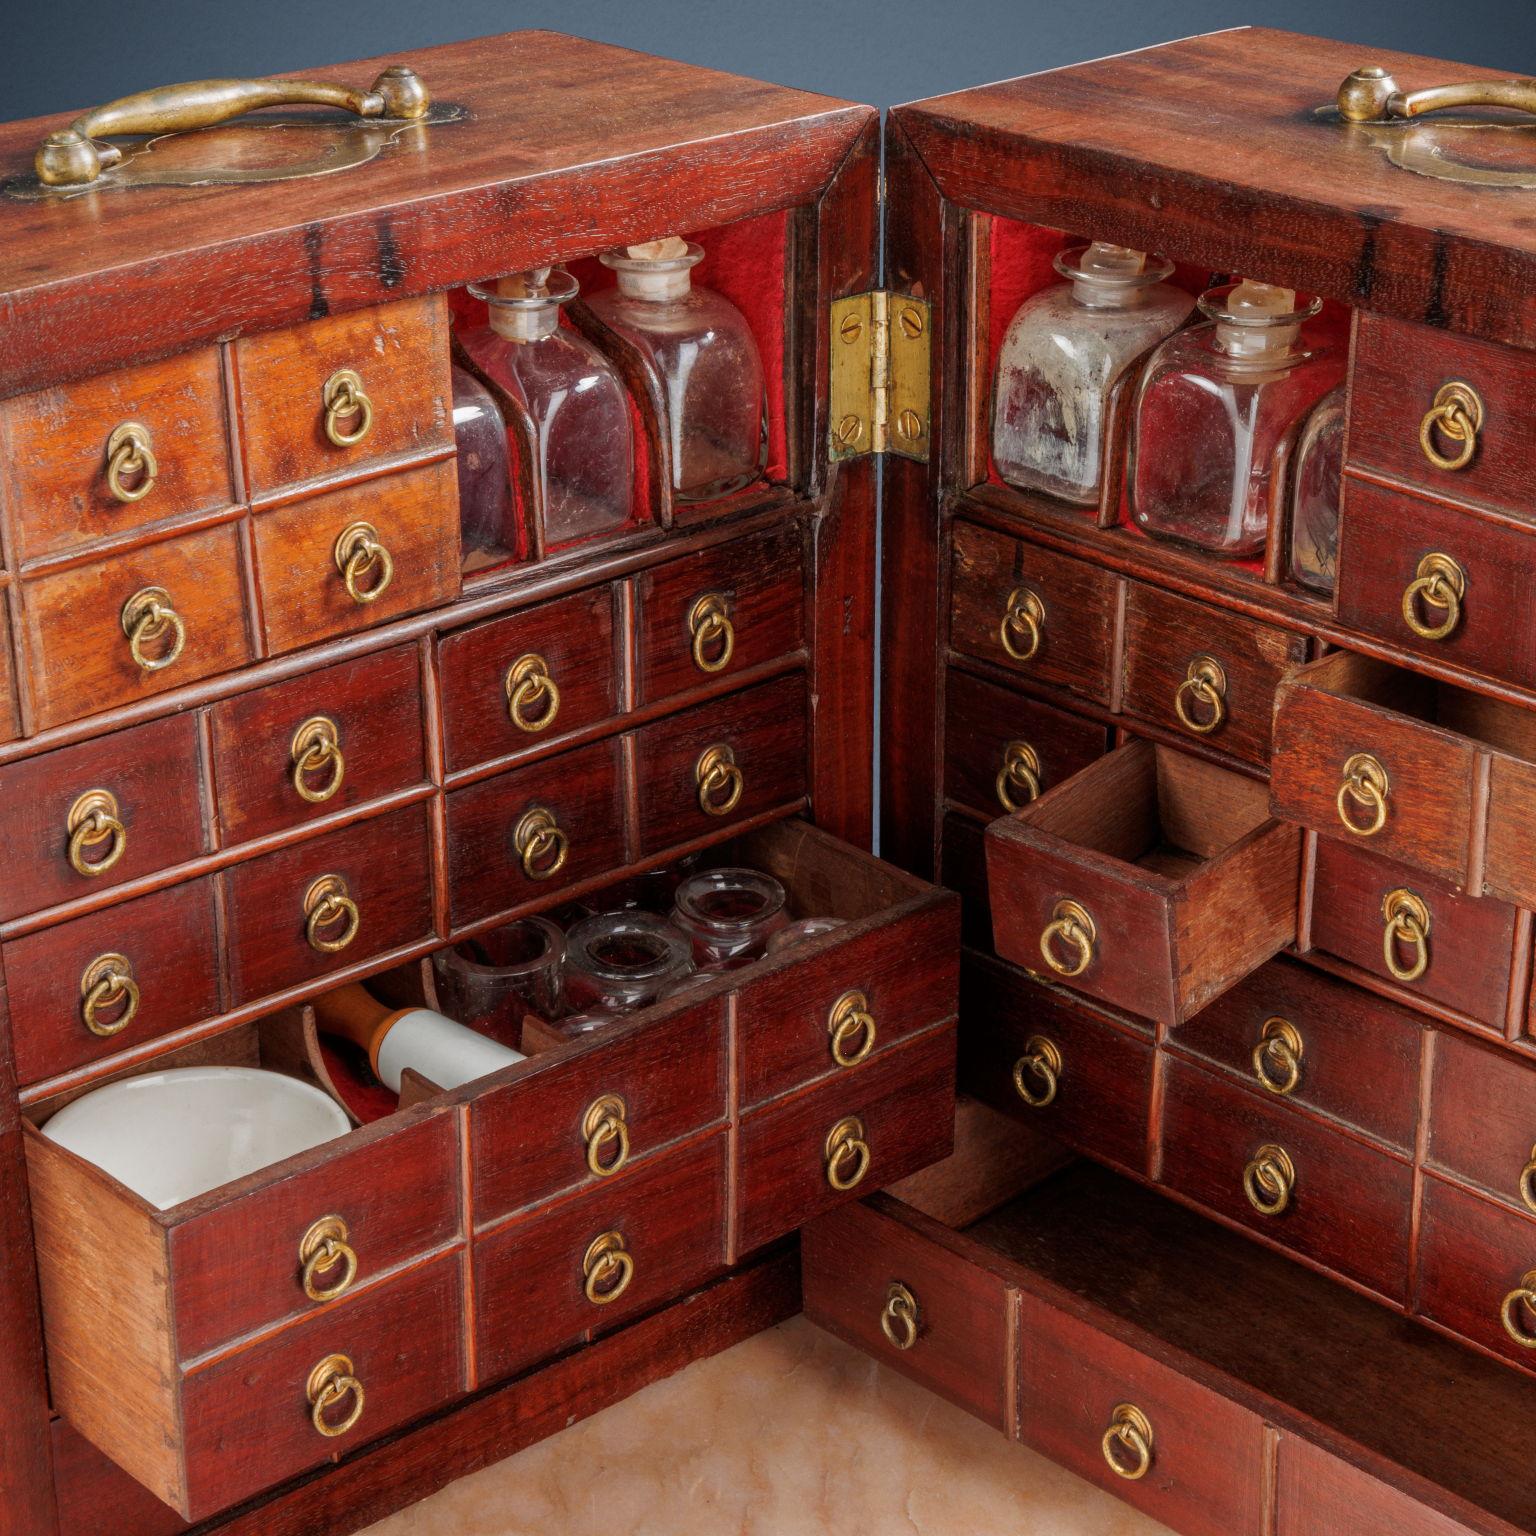 Italian Travel Pharmacy for Apothecary, Tuscany, First Quarter of the 19th Century